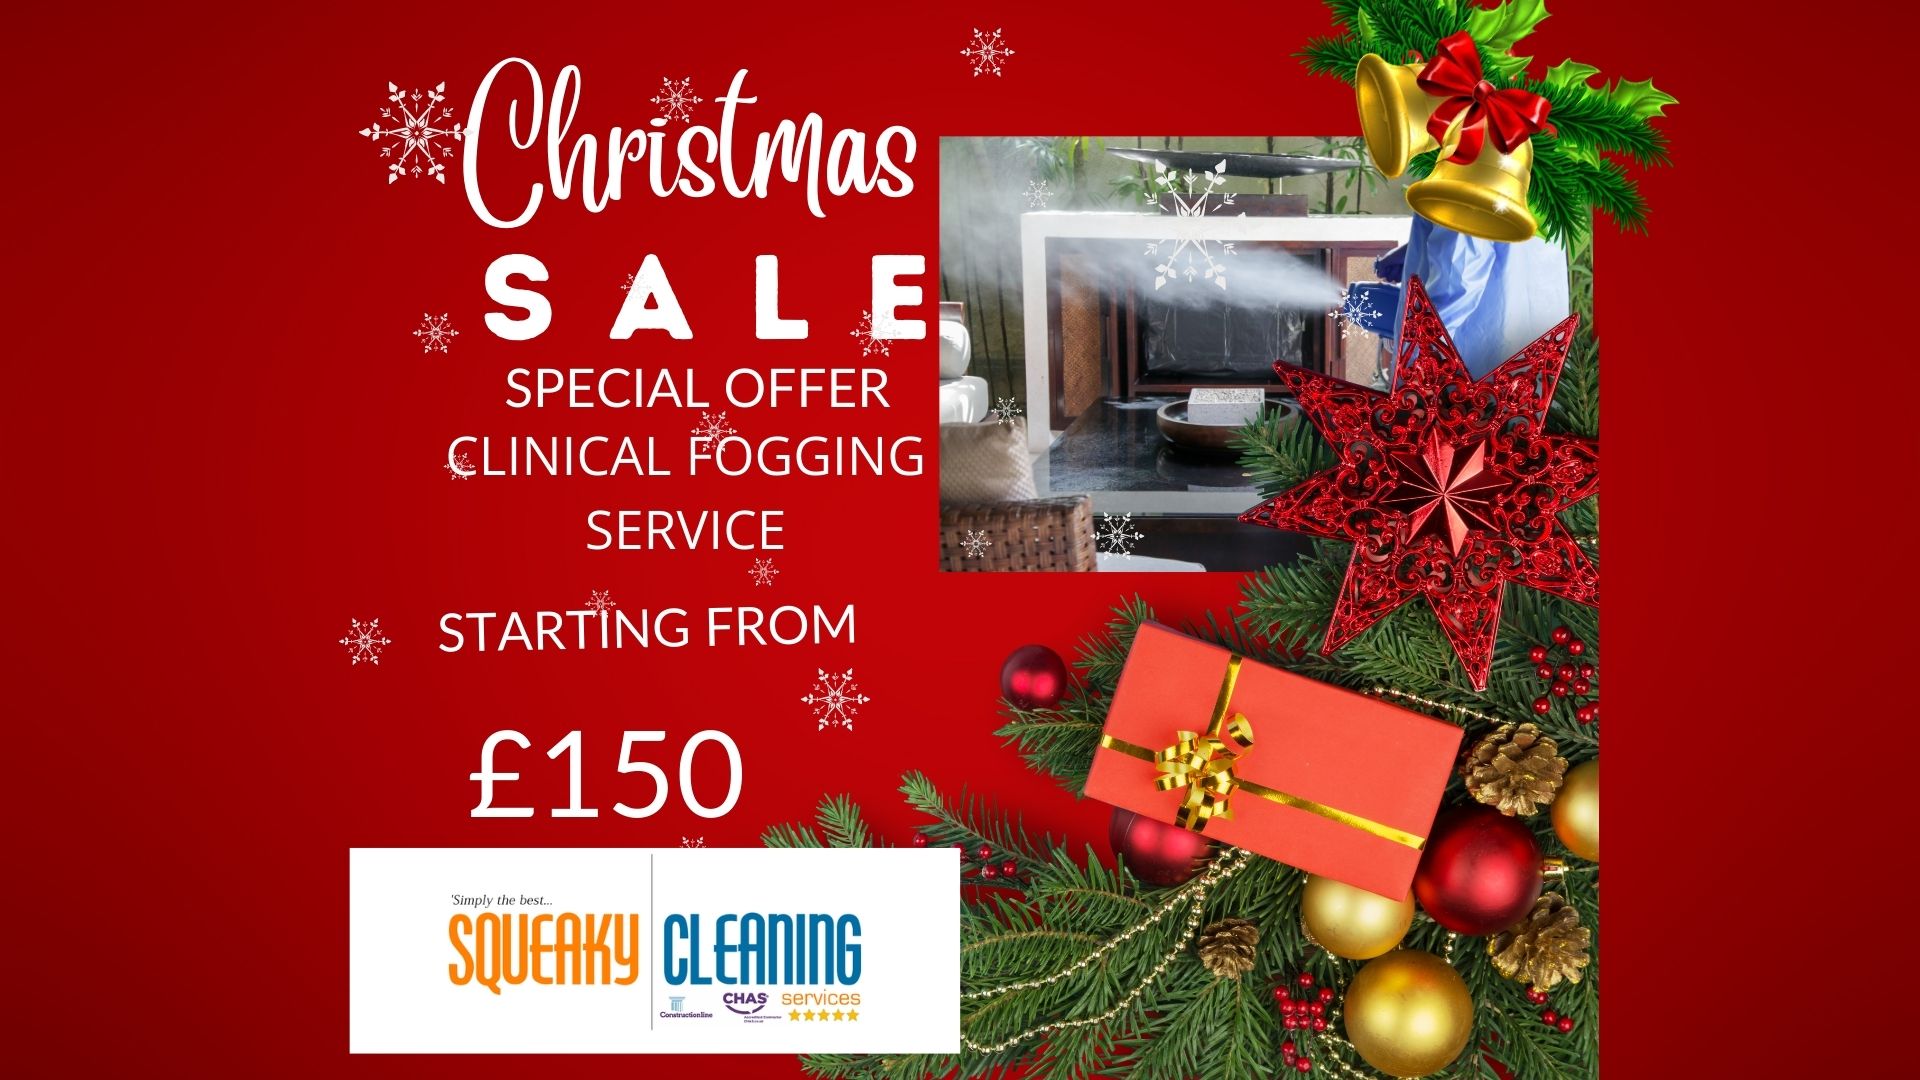 Squeaky Cleaning Services Ltd - Commercial & Domestic Services